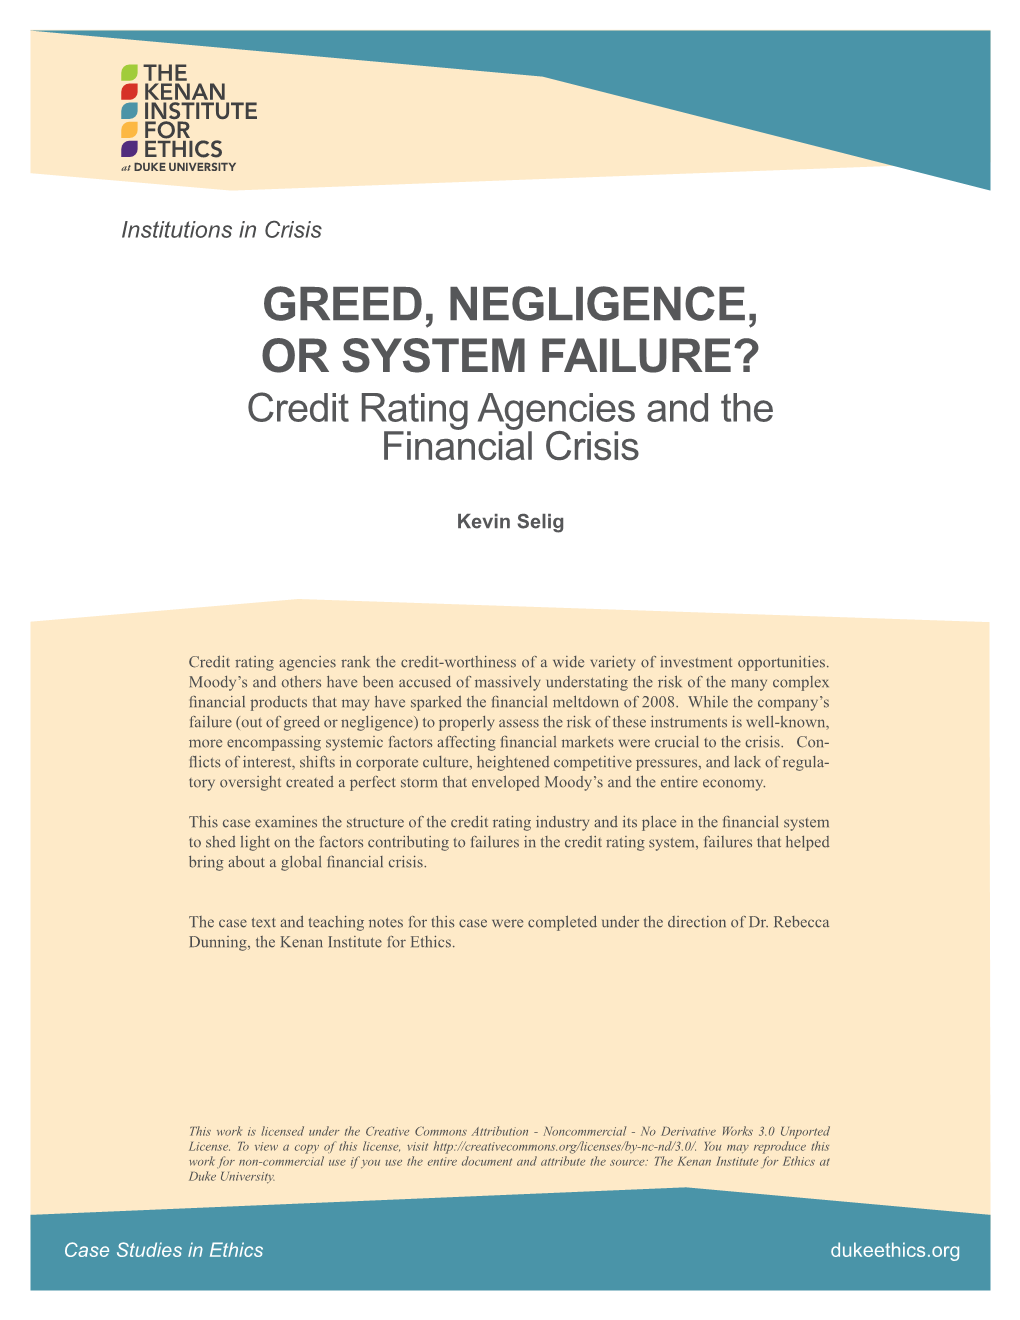 GREED, NEGLIGENCE, OR SYSTEM FAILURE? Credit Rating Agencies and the Financial Crisis